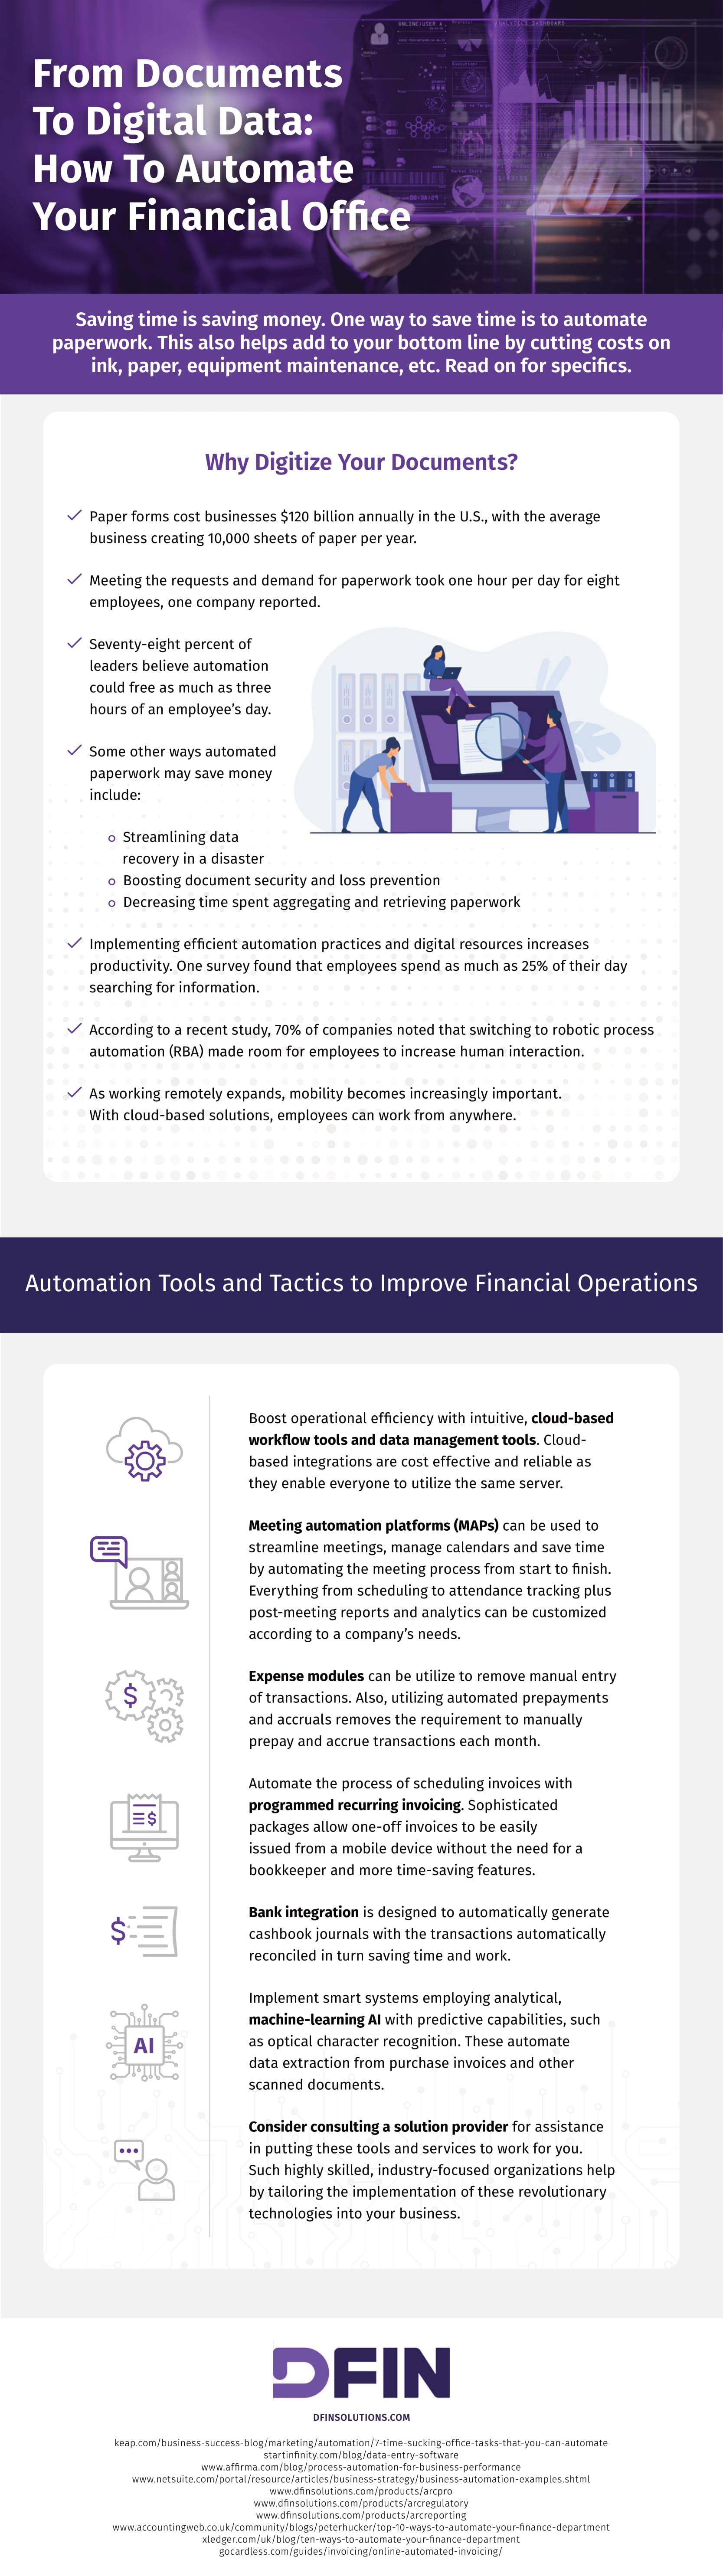 DFIN solutions infographic on ways to automate your Finance processes